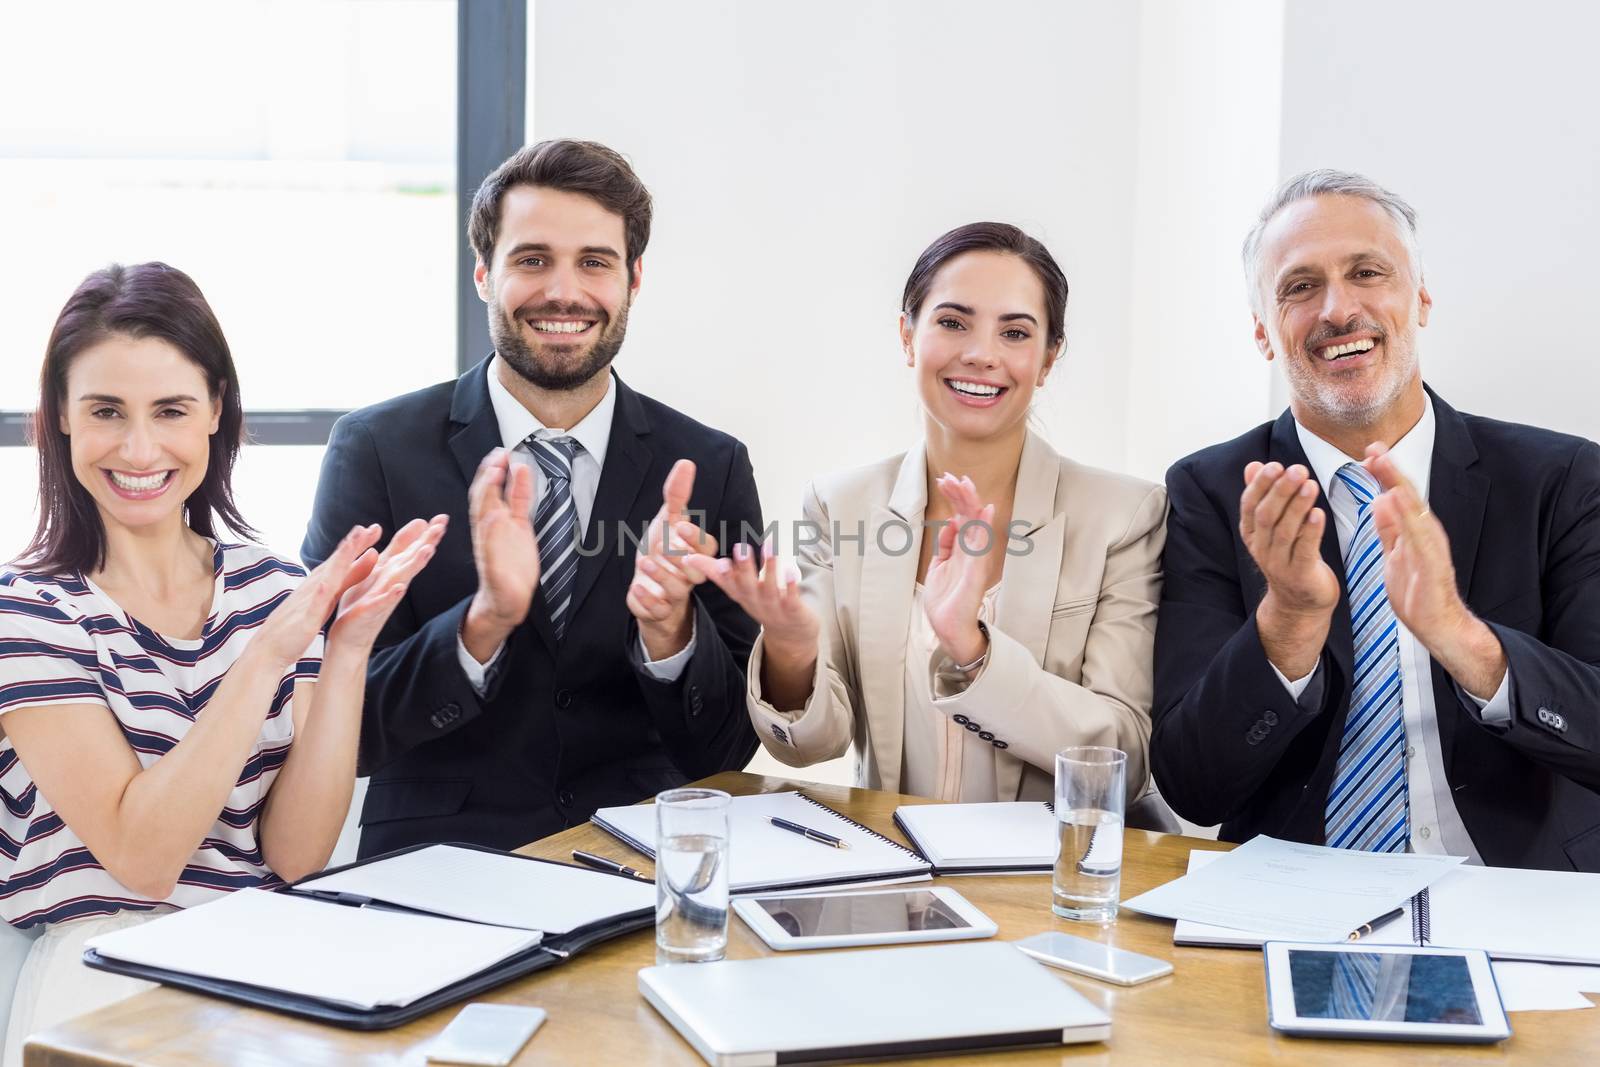 Workers are applauding and smiling  by Wavebreakmedia